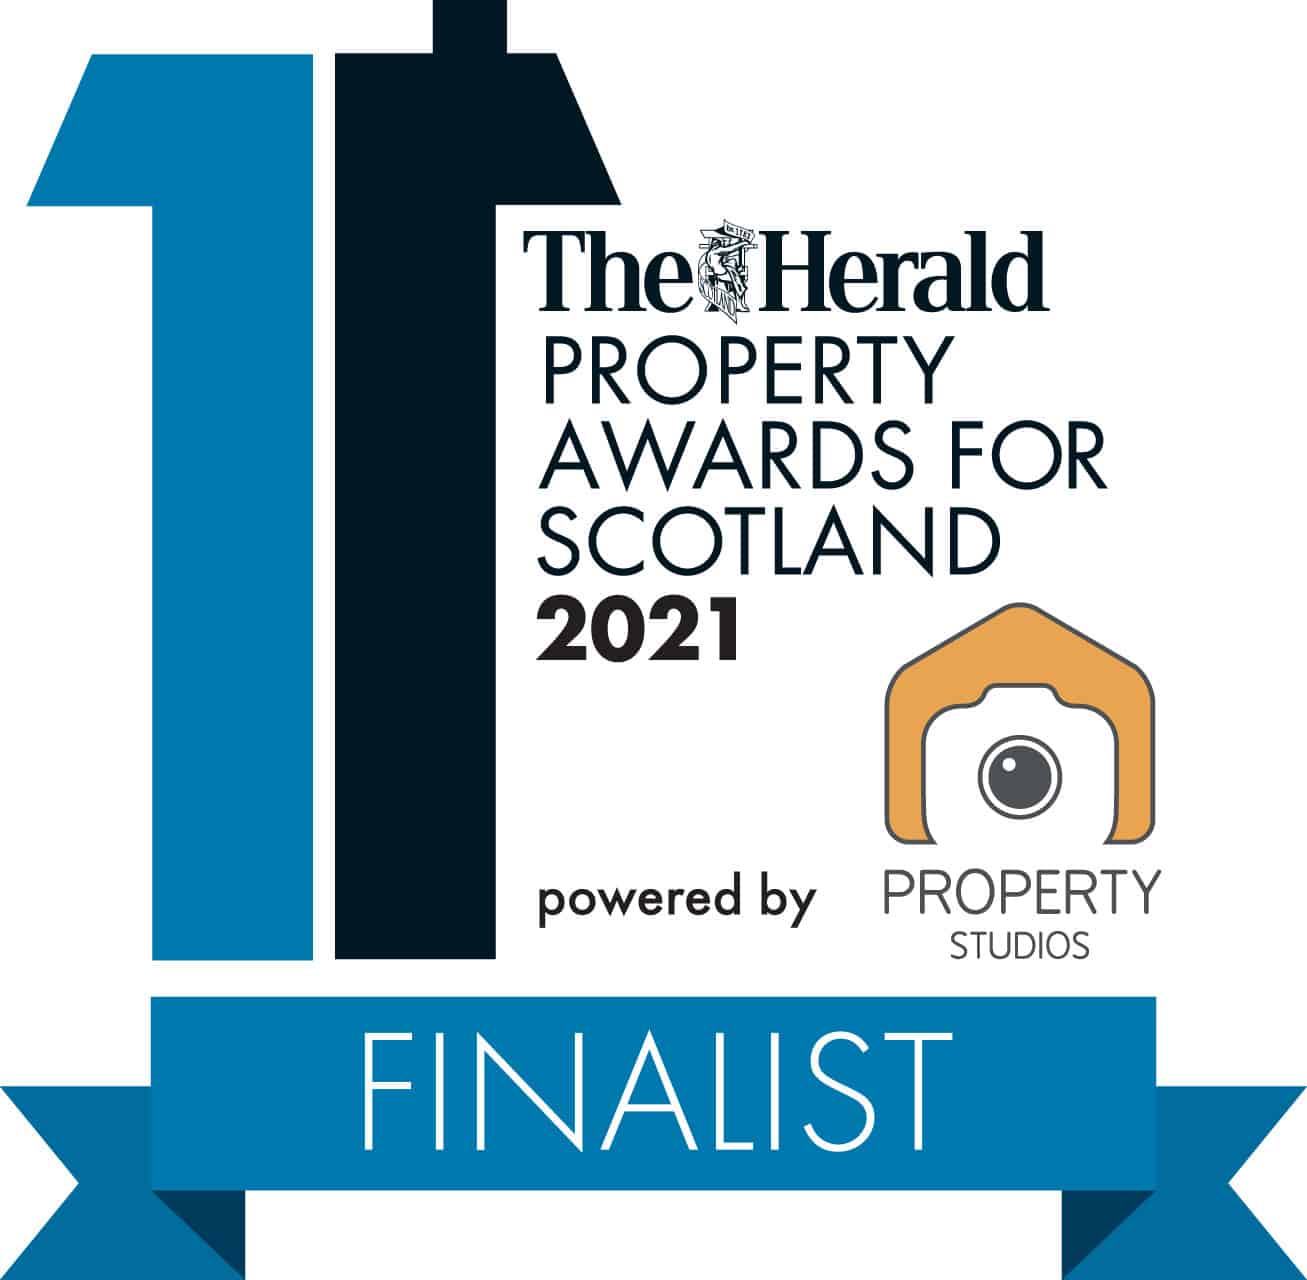 Finalist Badge - The Herald Property Awards for Scotland 2021 powered by Property Studios